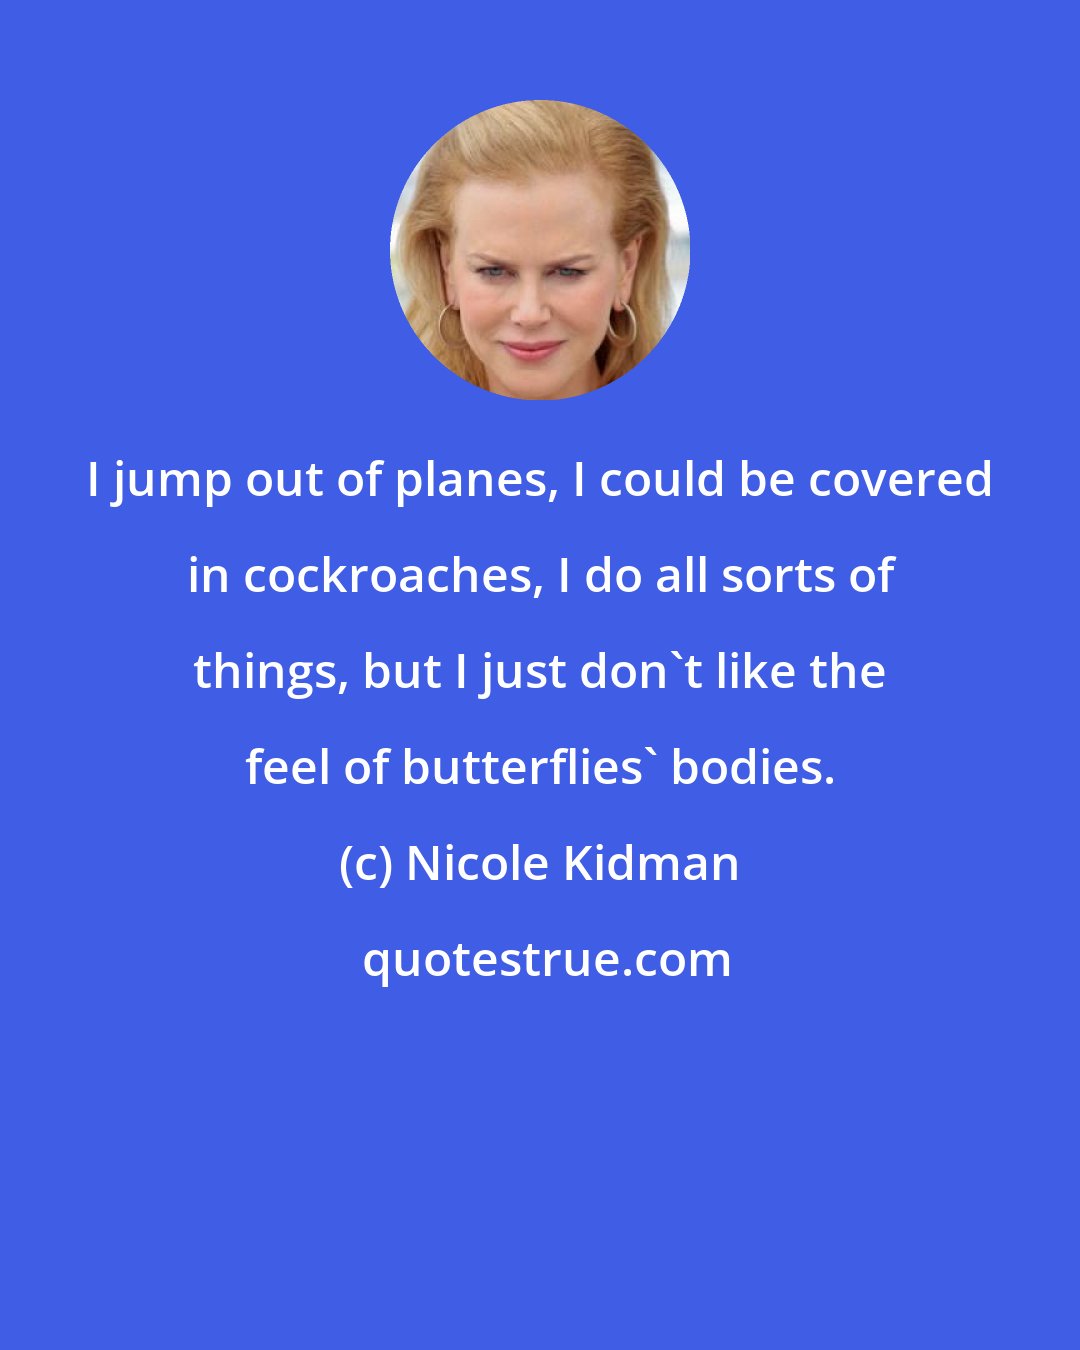 Nicole Kidman: I jump out of planes, I could be covered in cockroaches, I do all sorts of things, but I just don't like the feel of butterflies' bodies.